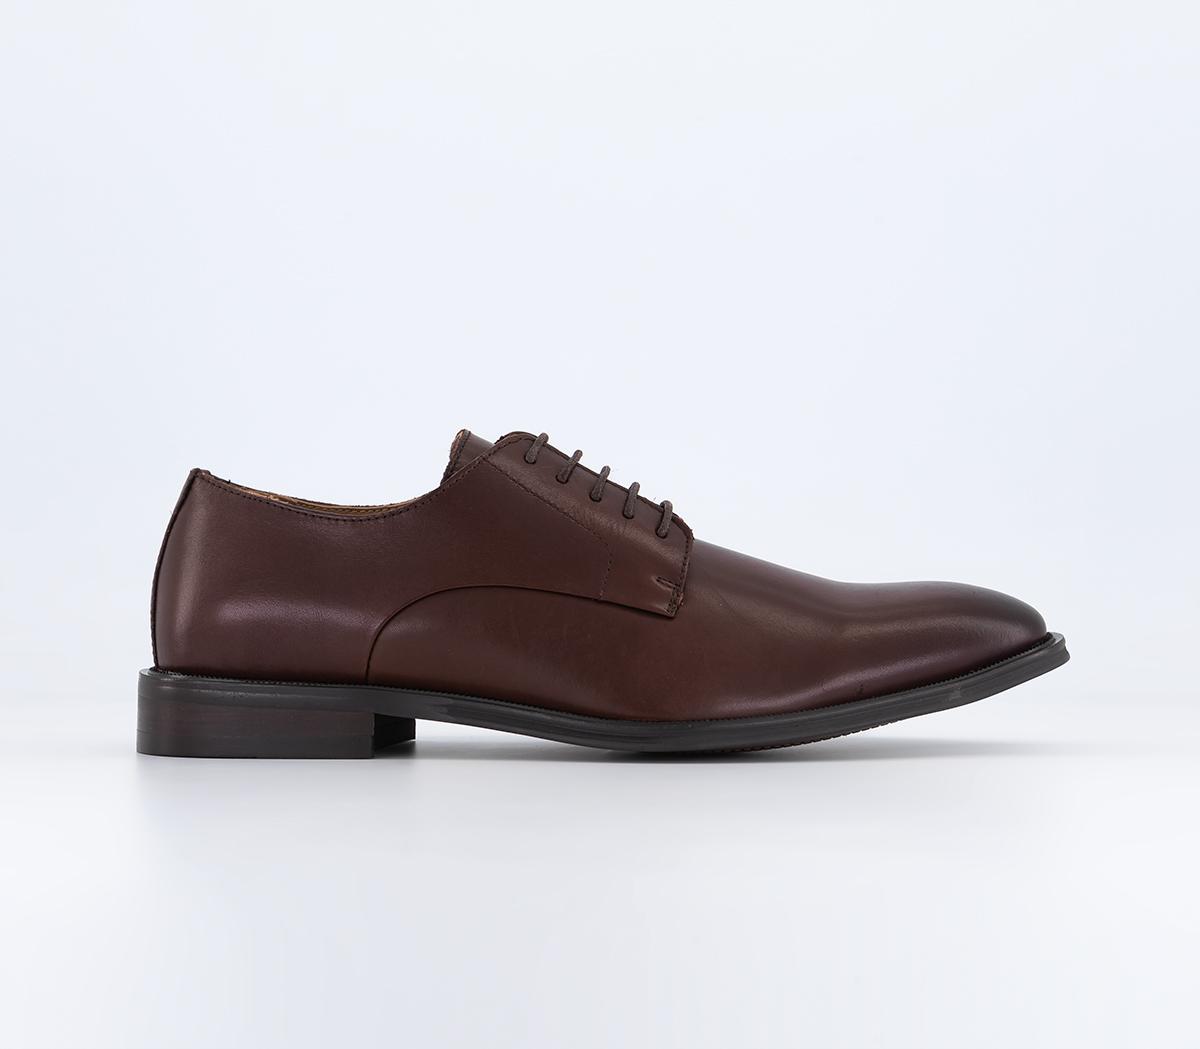 Midland 4 Eye Plain Toe Derby Shoes Brown Leather